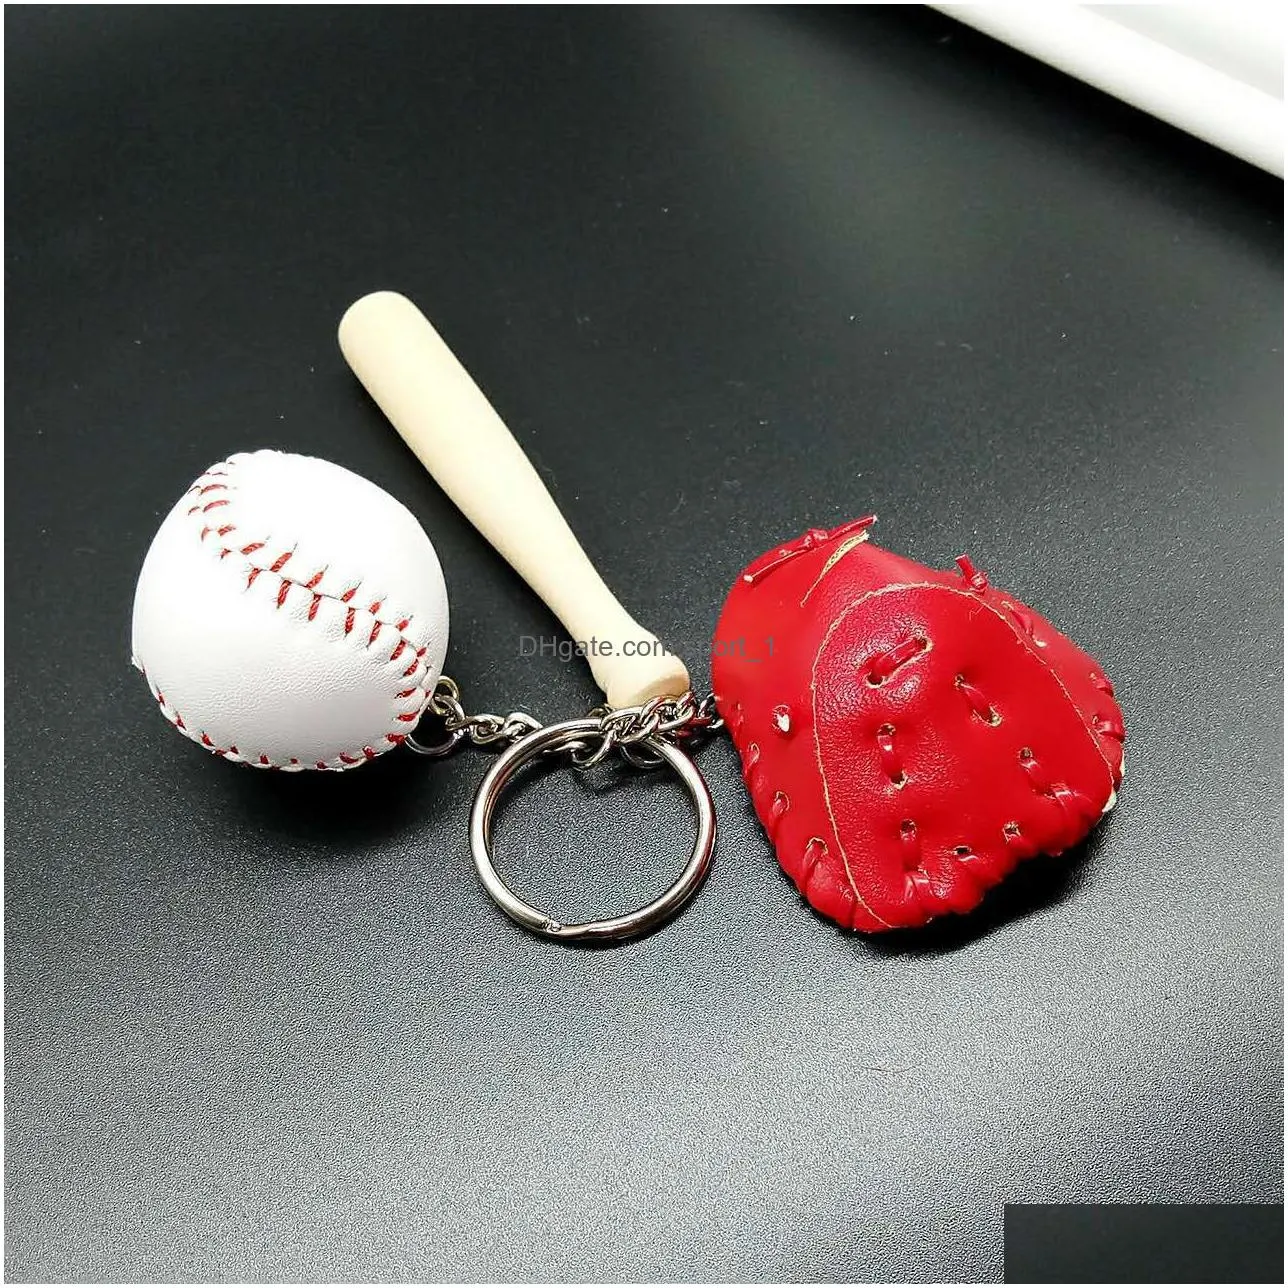  ship creative baseball keychain bag pendant sports souvenirs key rings gskr154 mix order 20 pieces a lot keychains